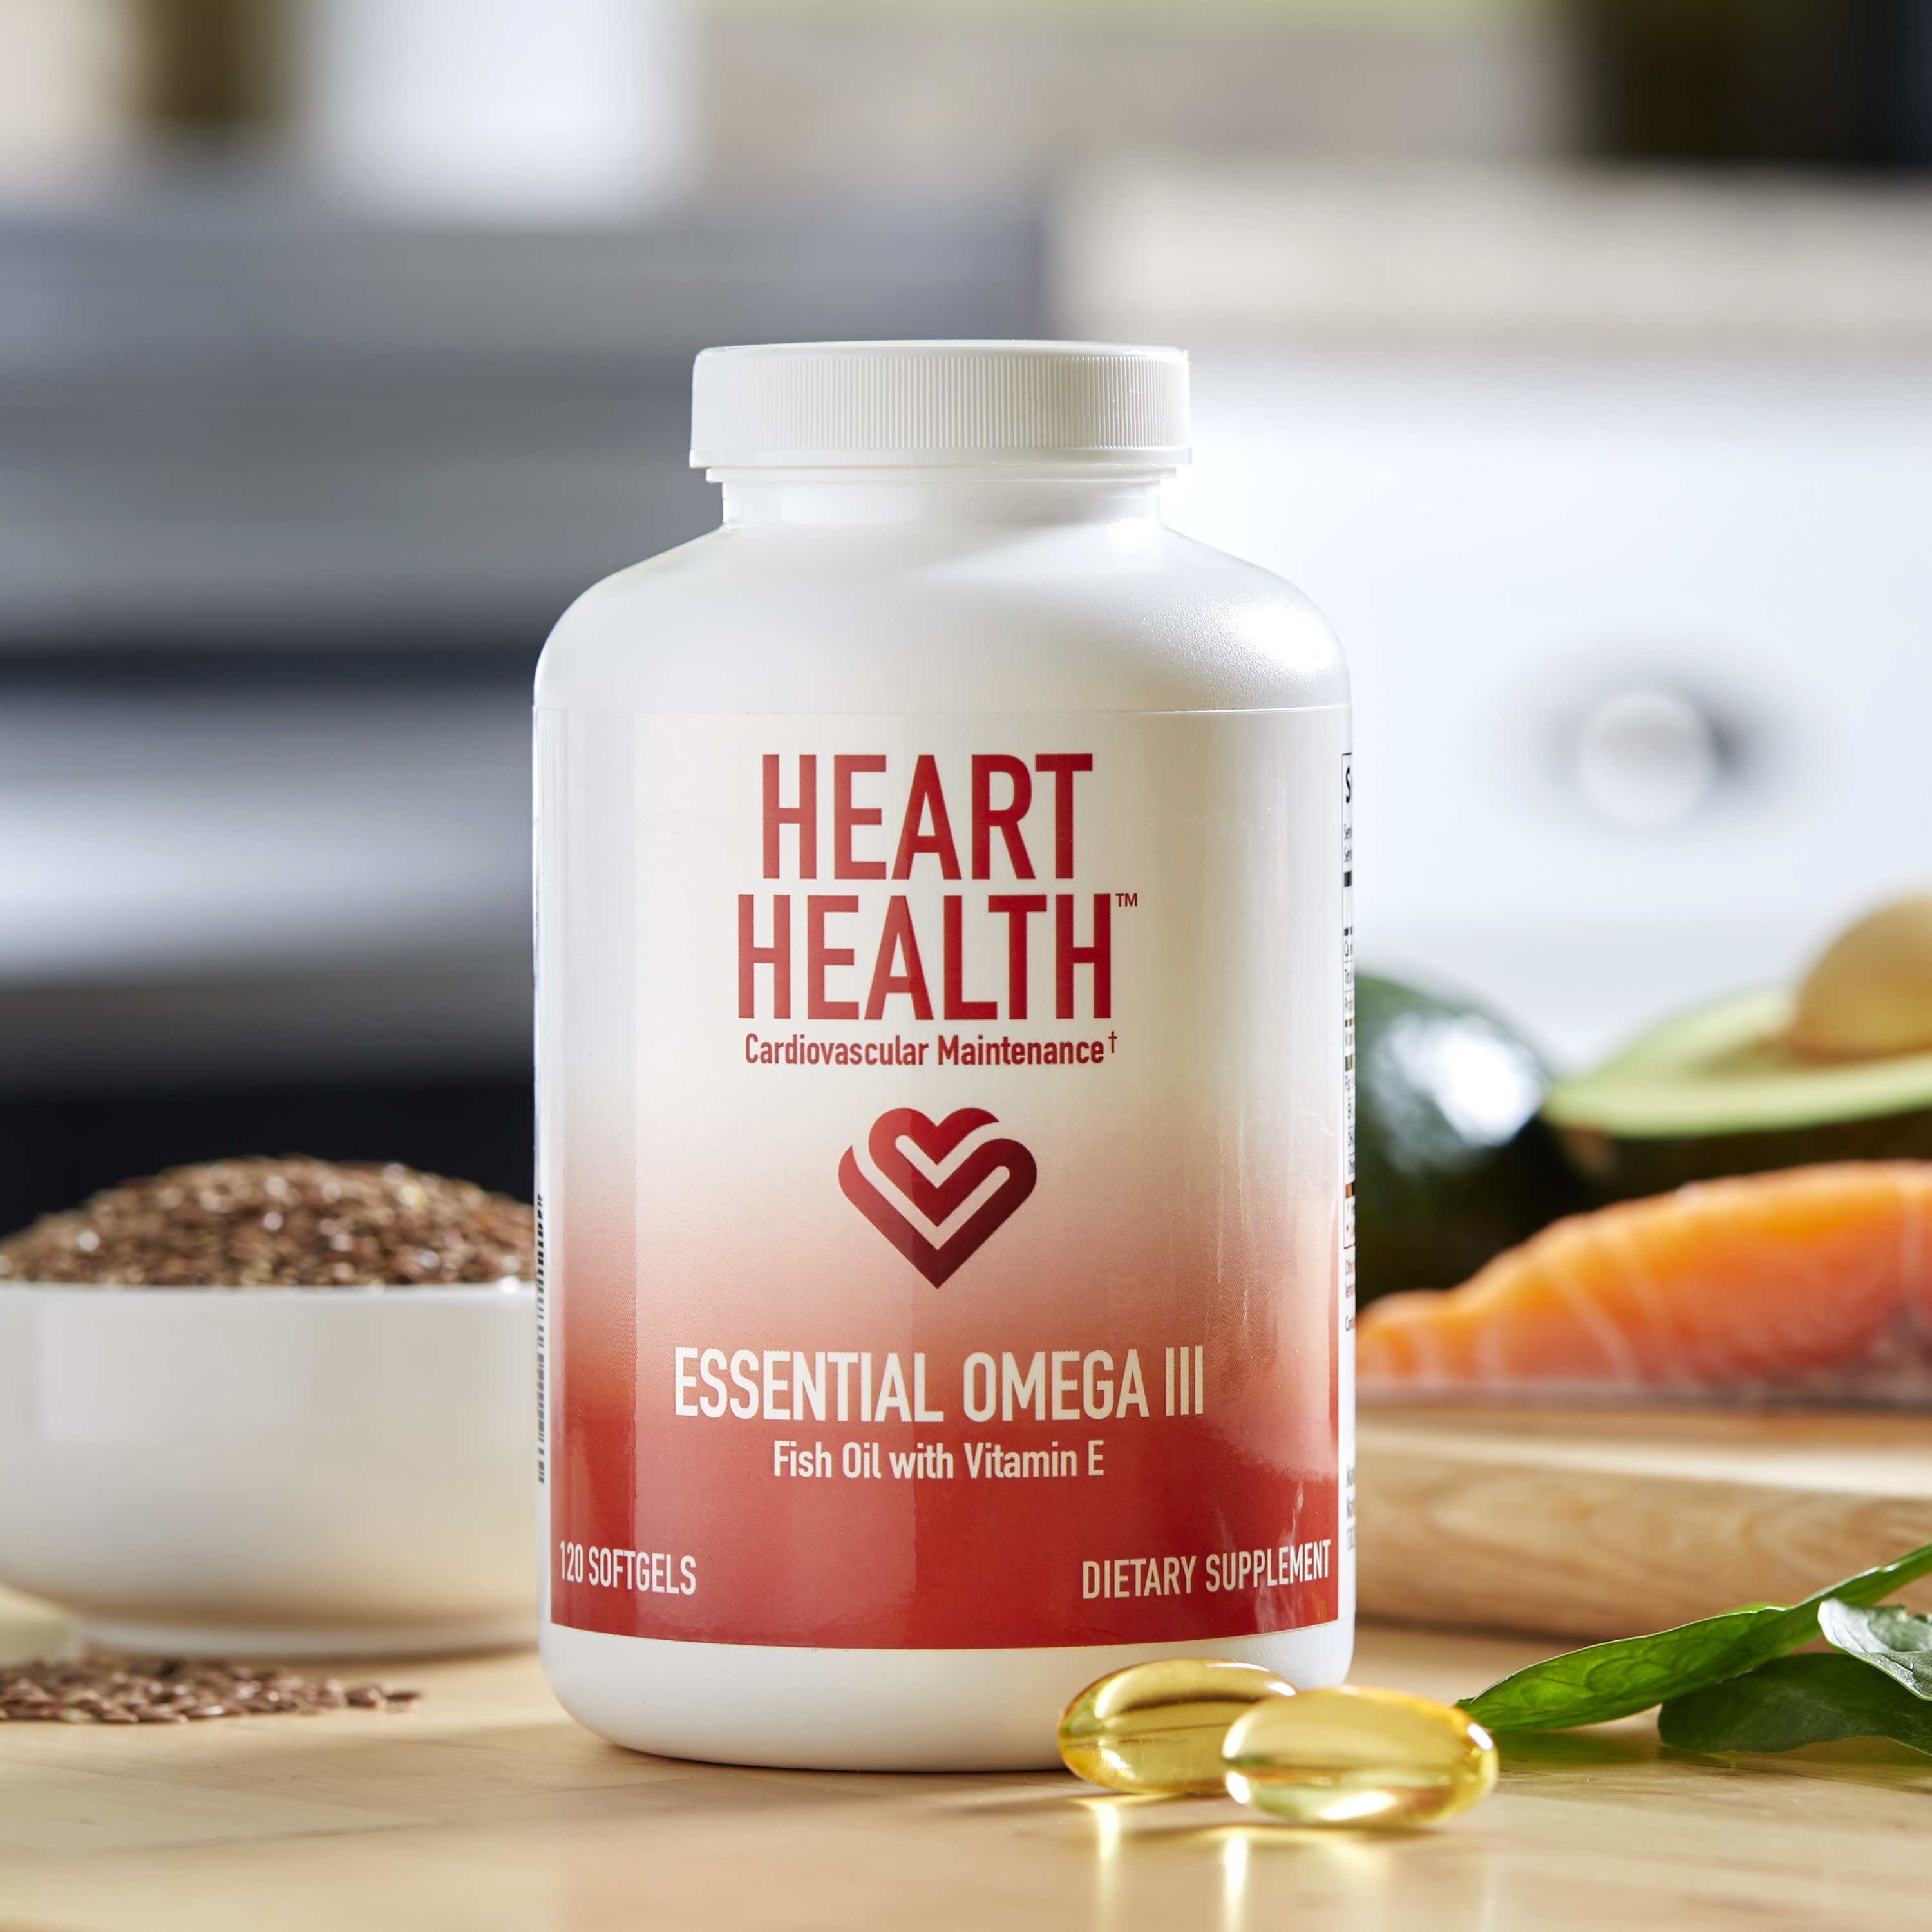 Primary Benefits* of Heart Health™ Essential Omega III Fish Oil